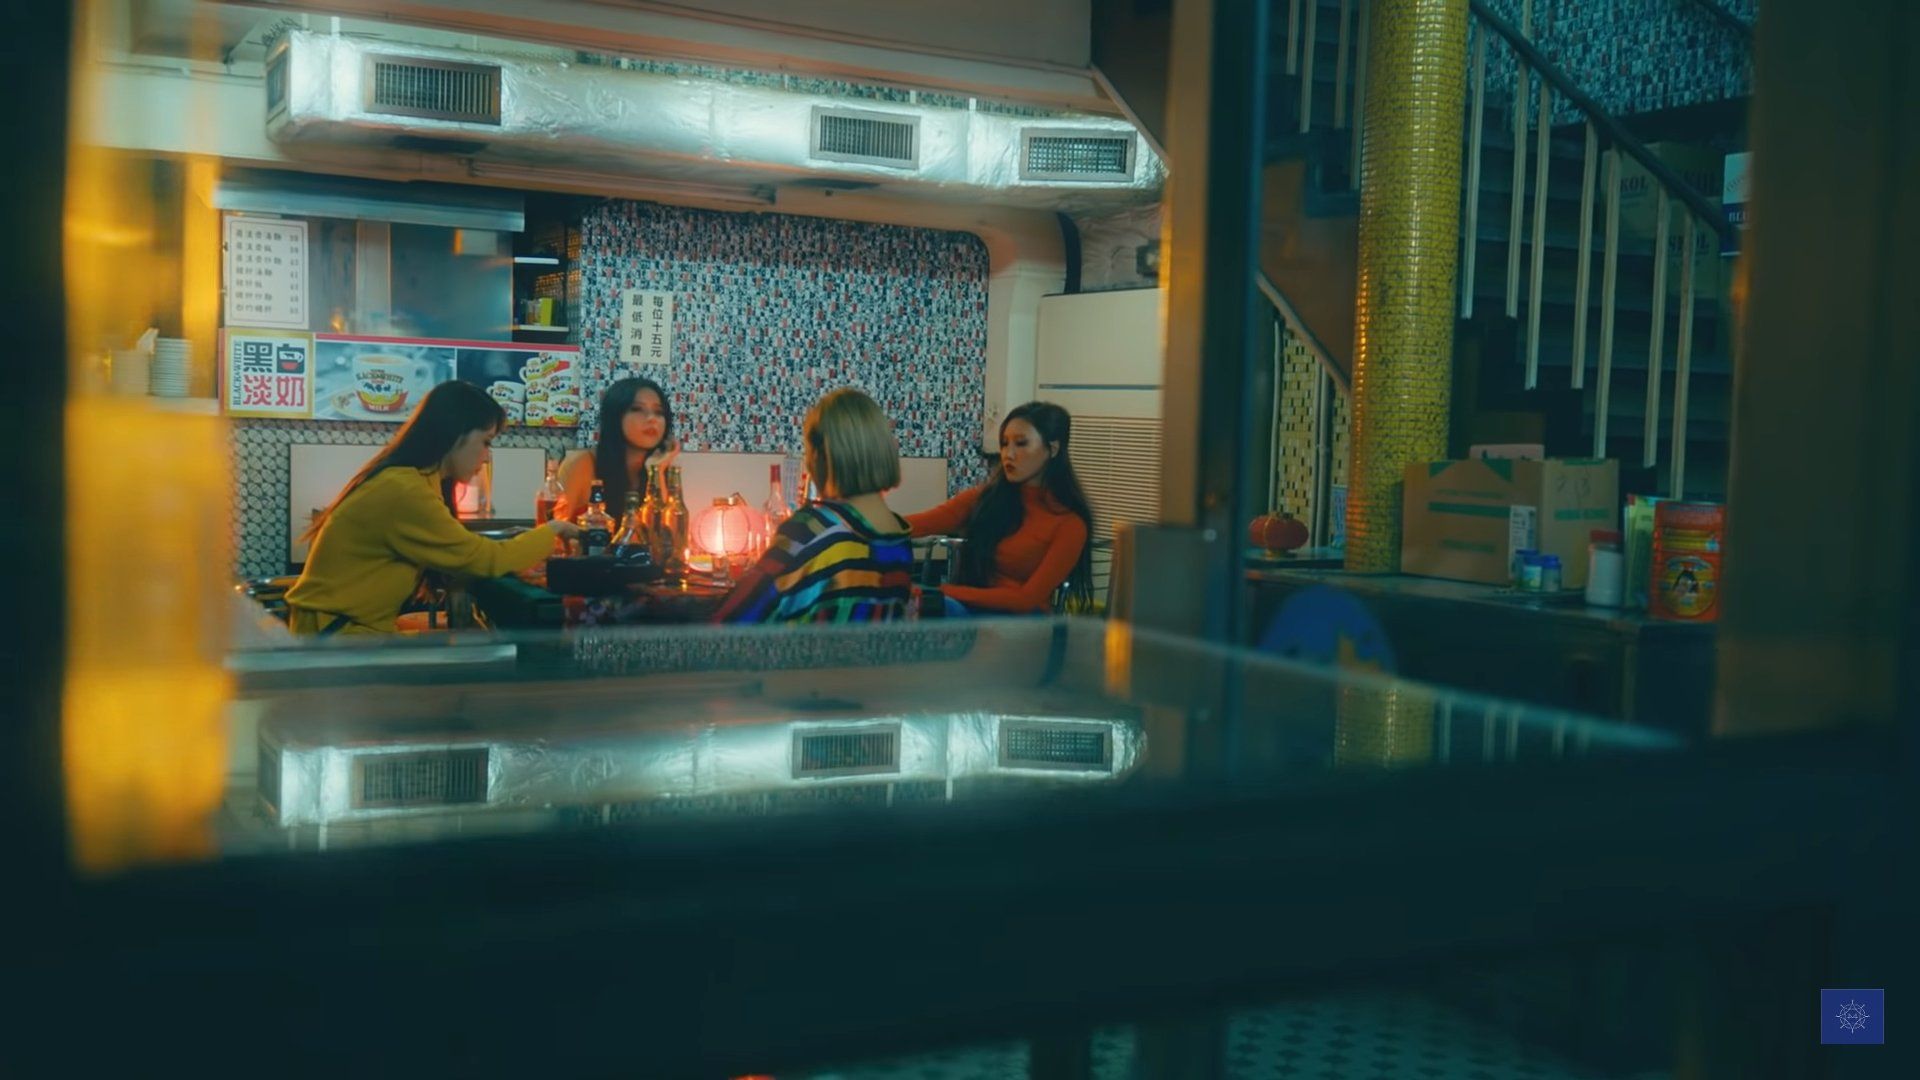 j - #MAMAMOO's Wind flower and Wong Kar Wai's Chungking Express thread detailing references in the music video to the work of Wong Kar Wai #마마무 #Wind_flower